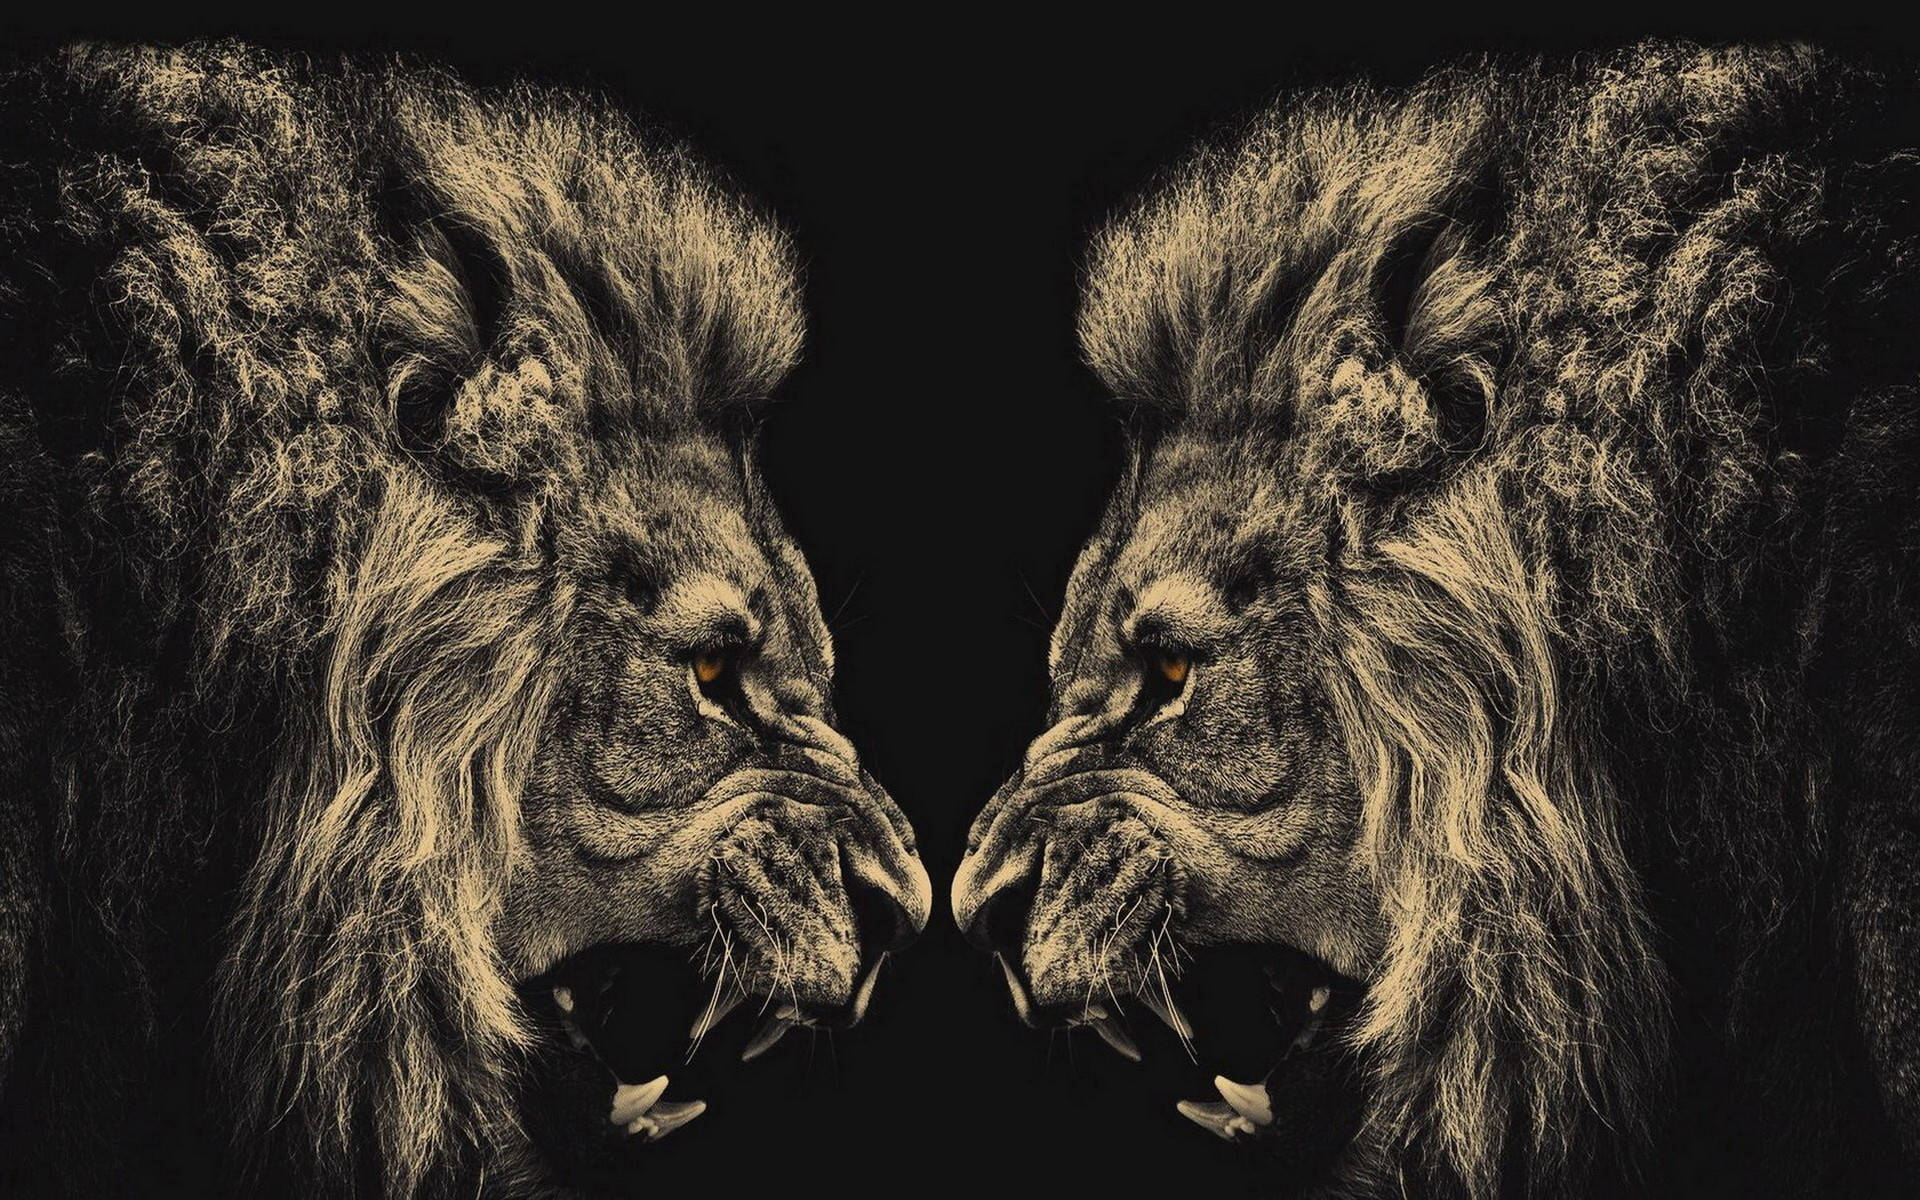 Two Angry Lions Illustration Wallpaper